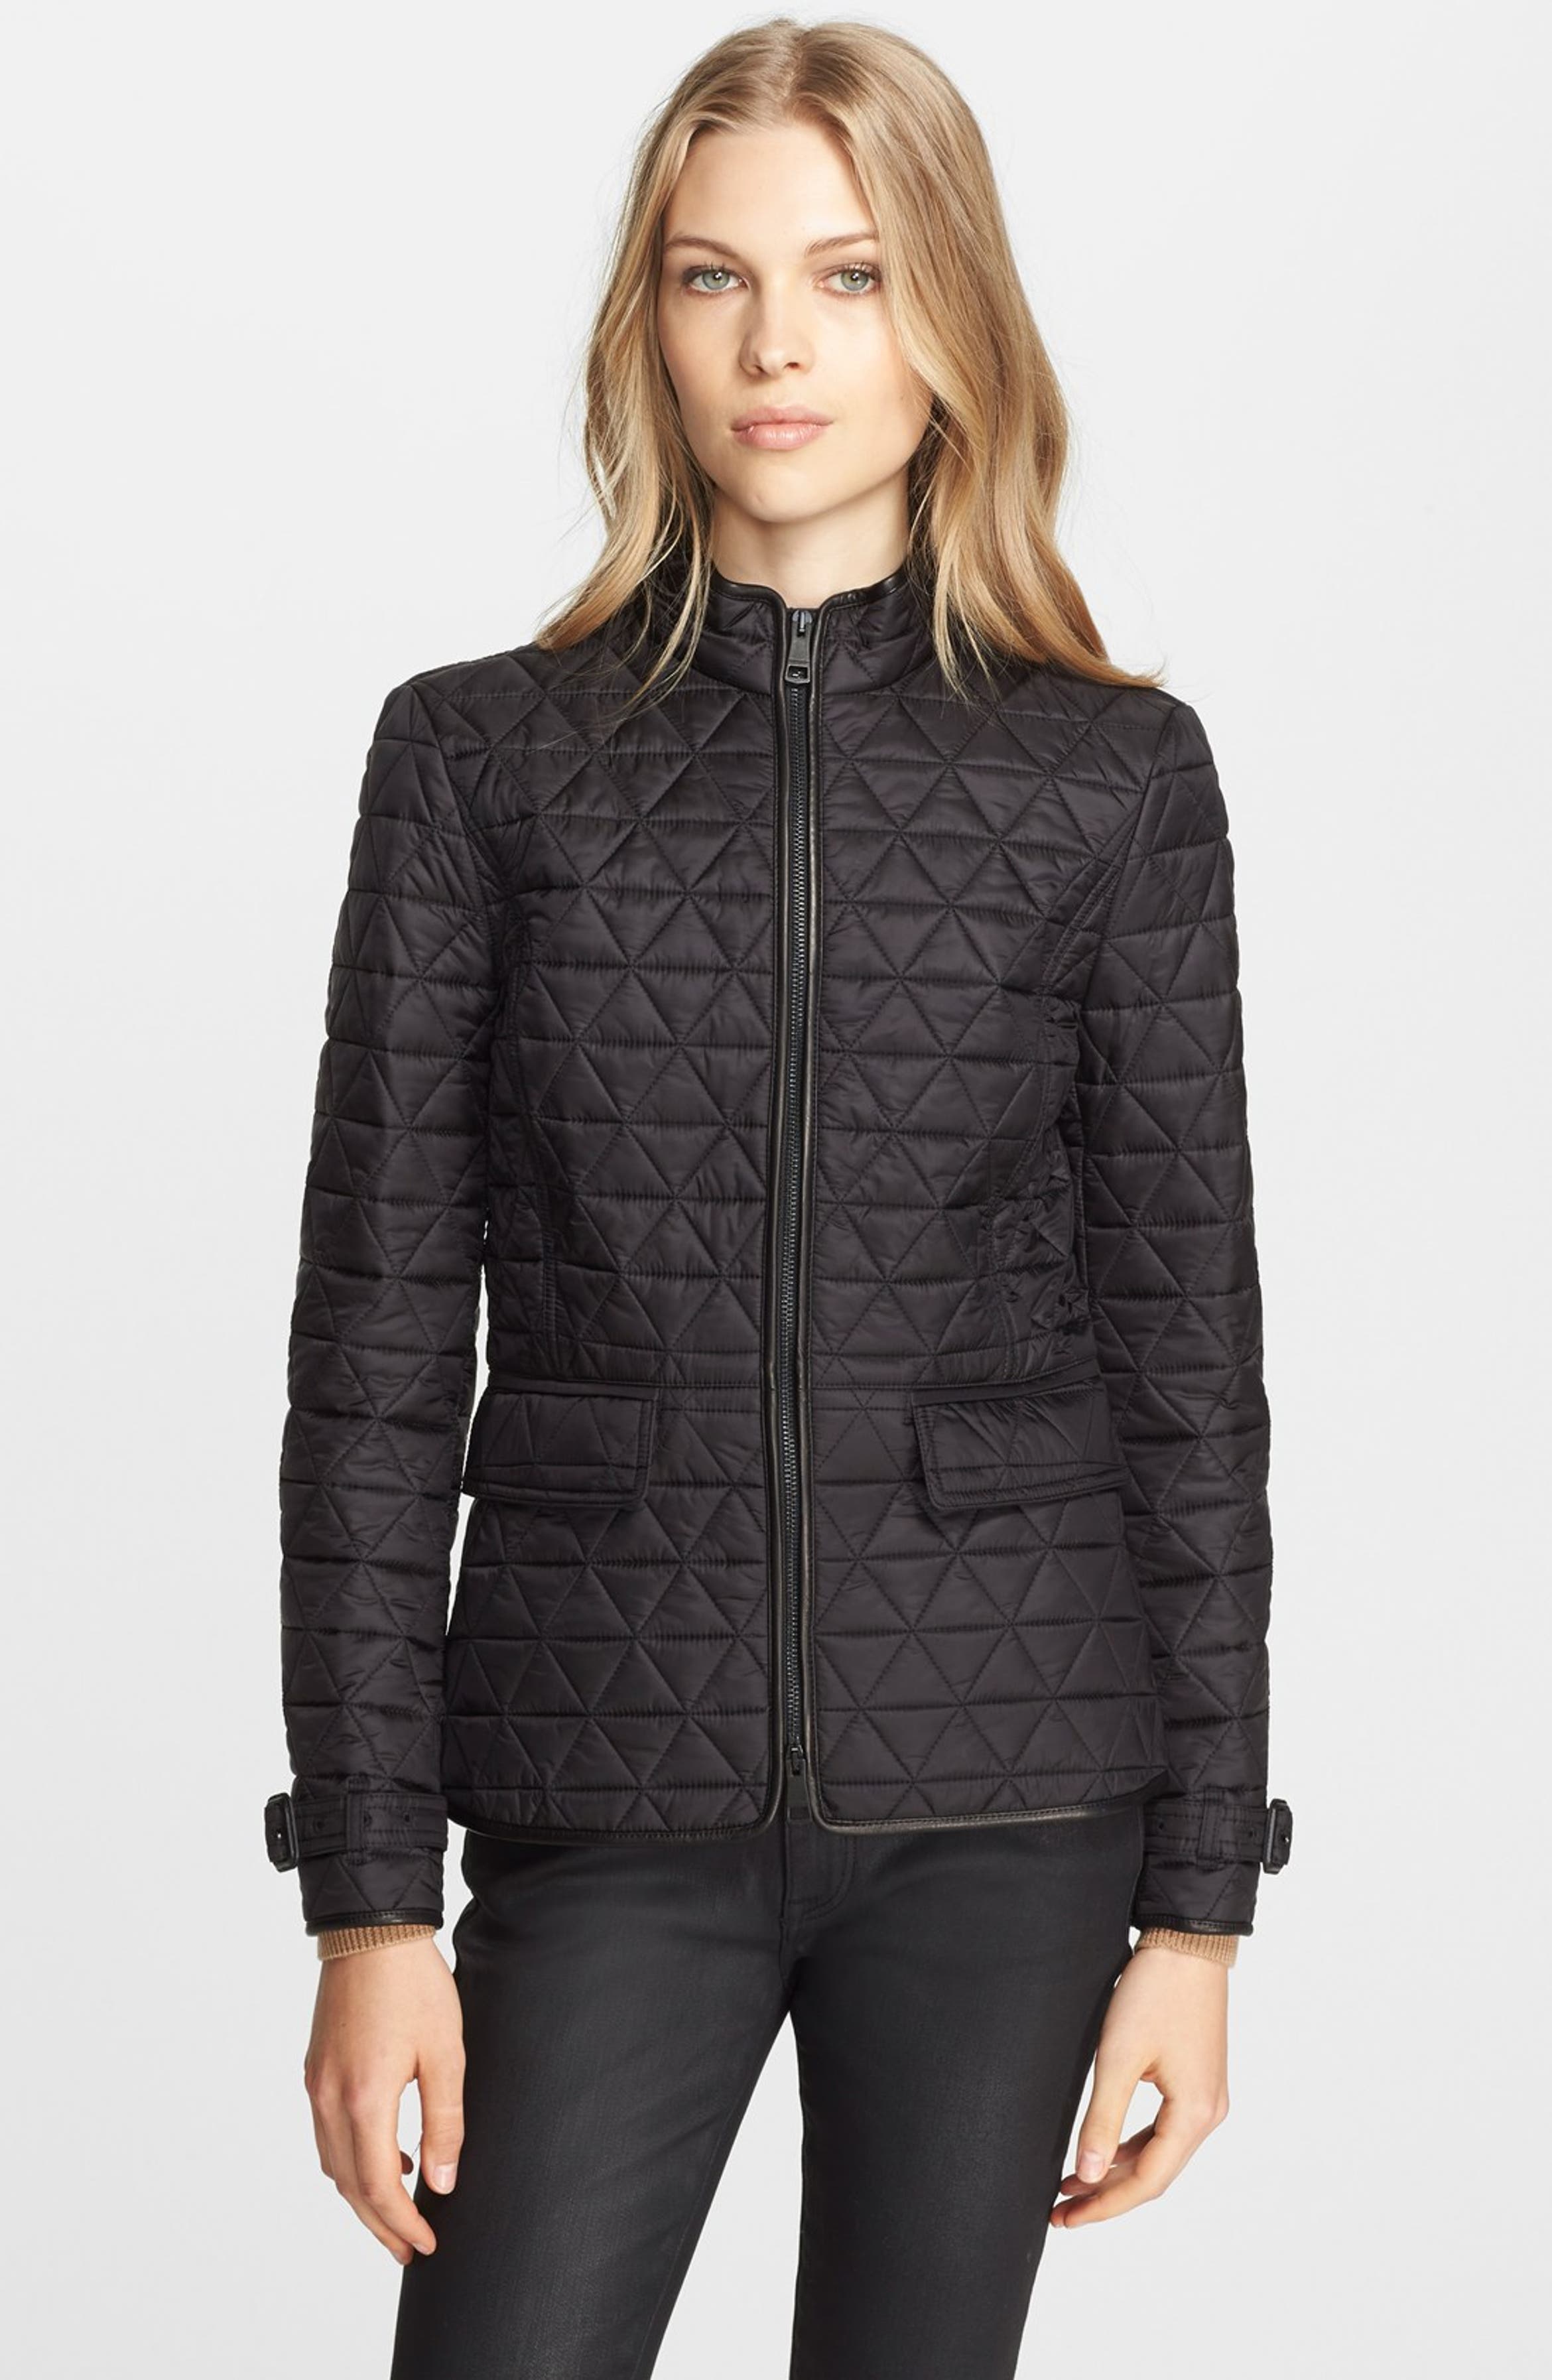 Burberry Brit 'Laycroft' Leather Trim Quilted Moto Jacket | Nordstrom